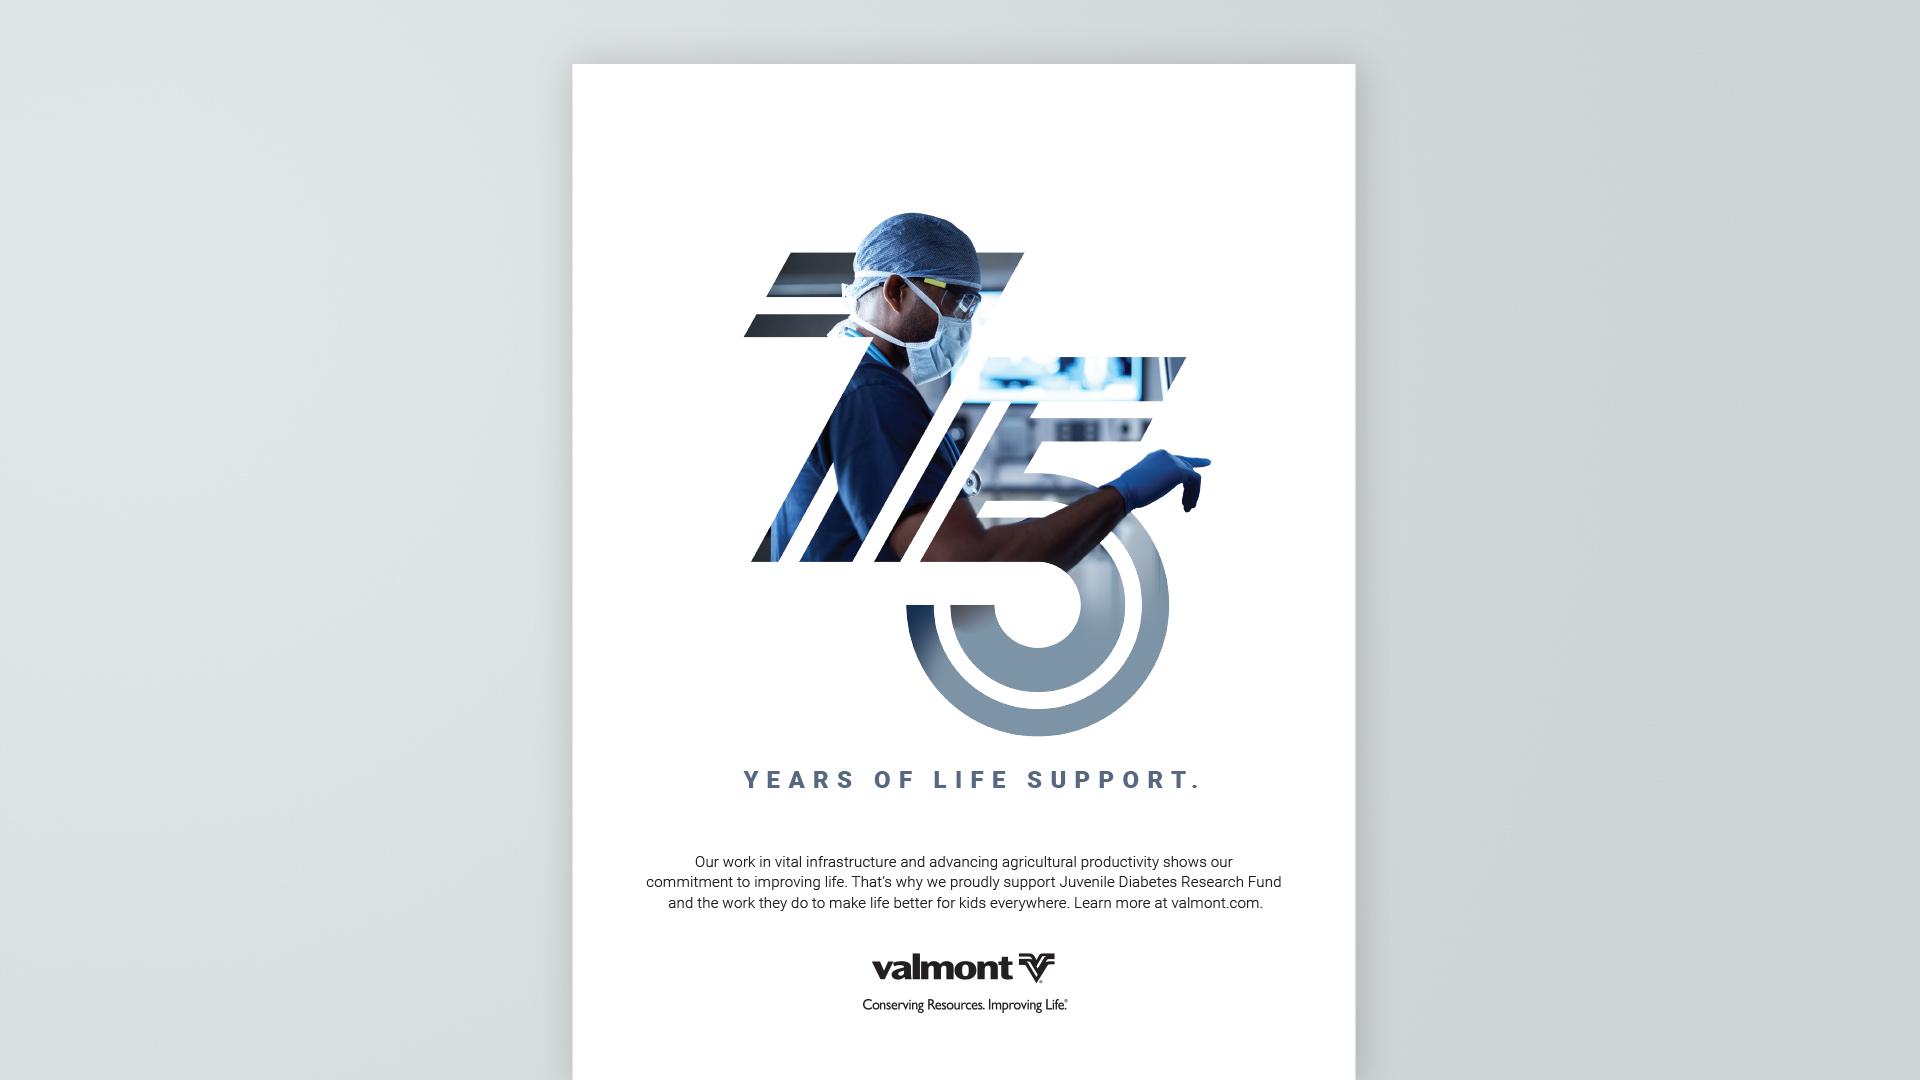 Valmont Anniversary Campaign Omaha: Ad Layout